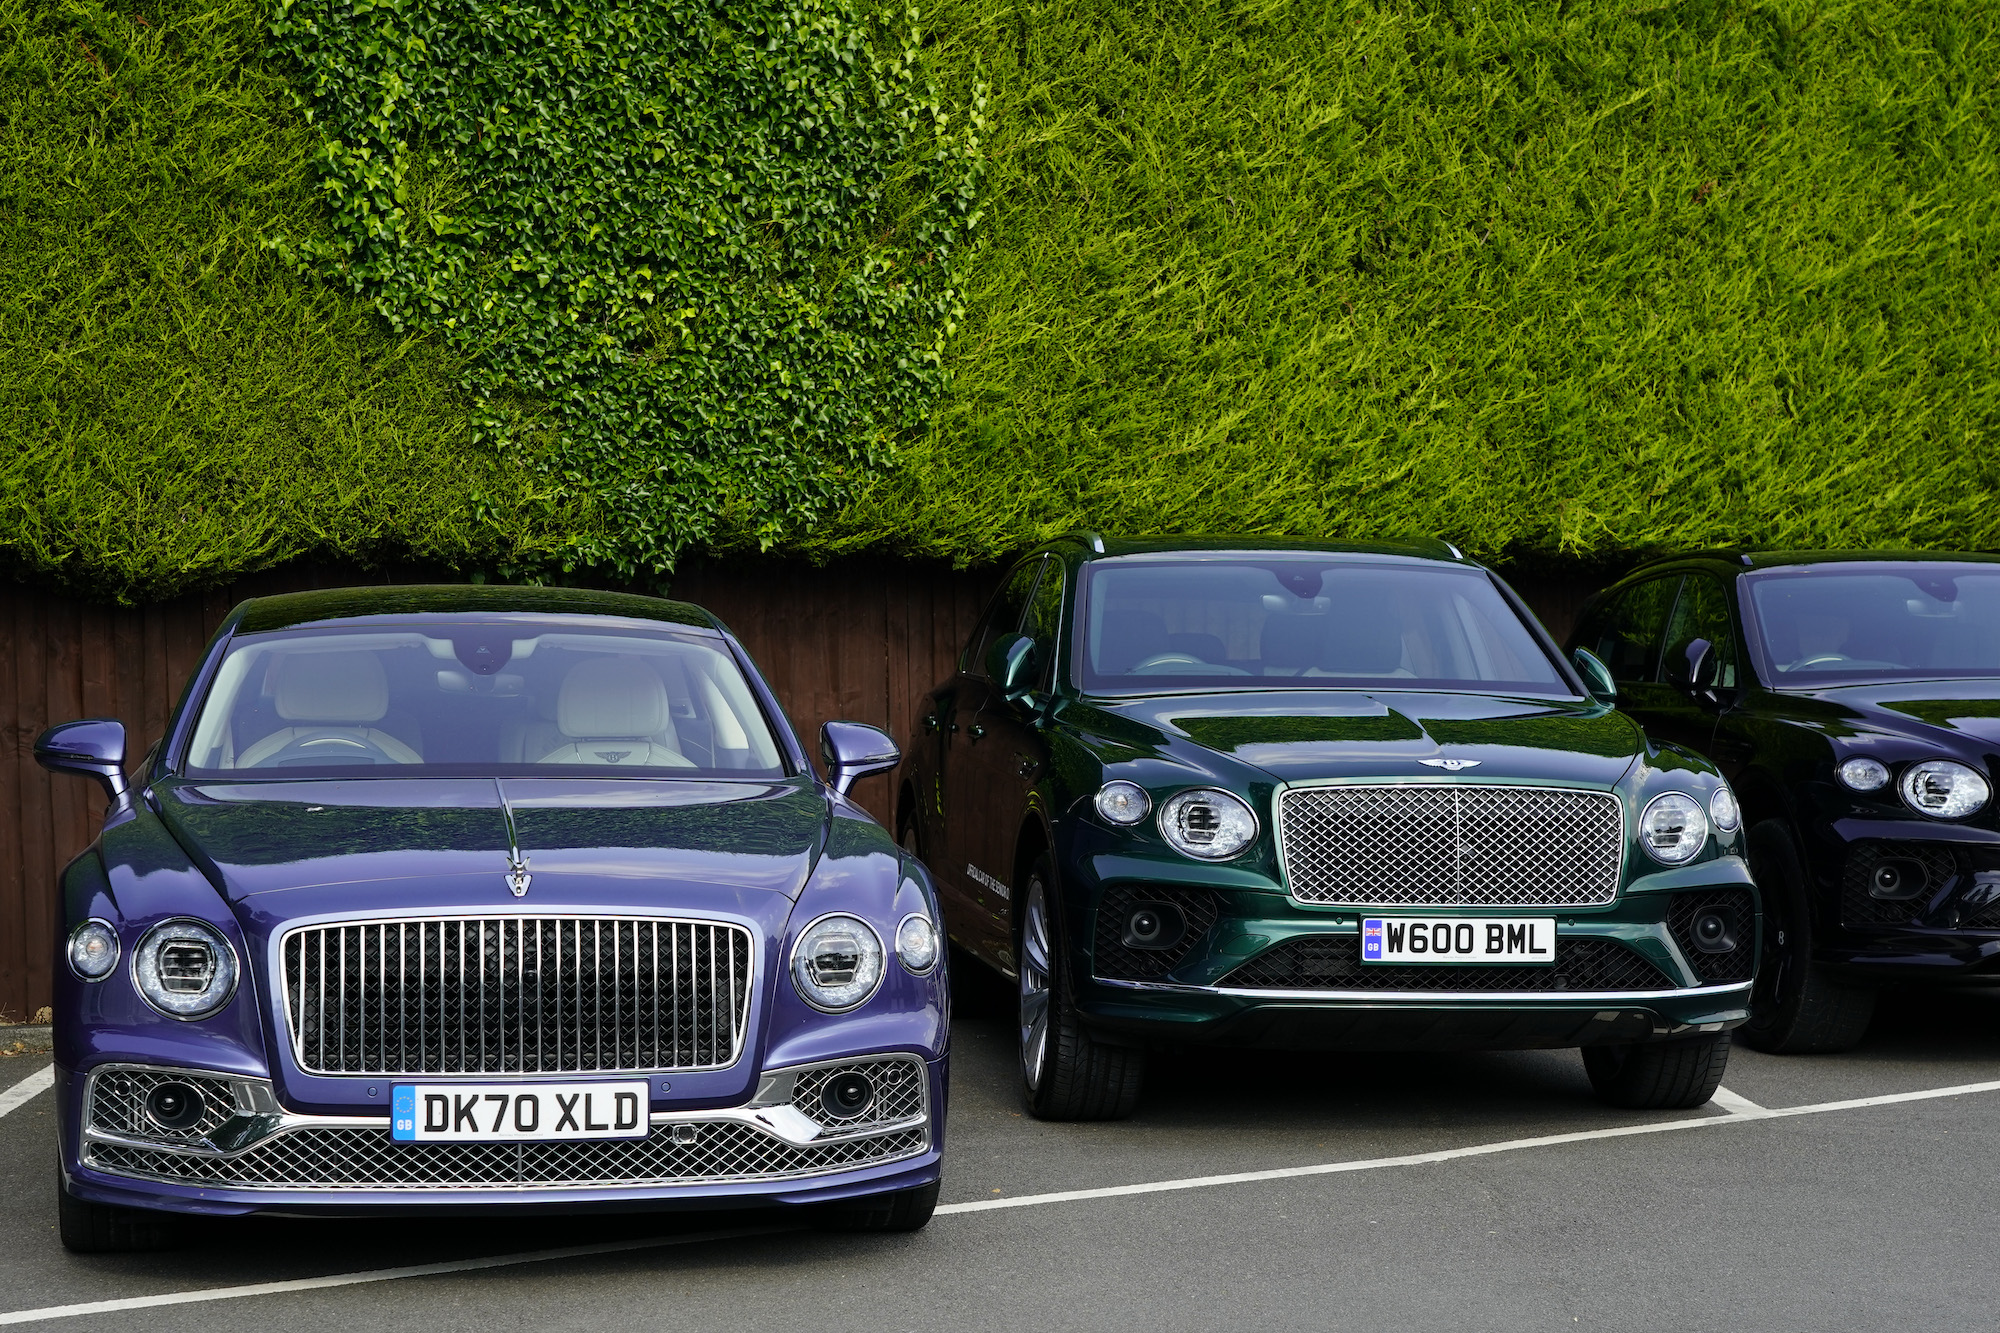 Bentley luxury cars lined up along a tall green hedge